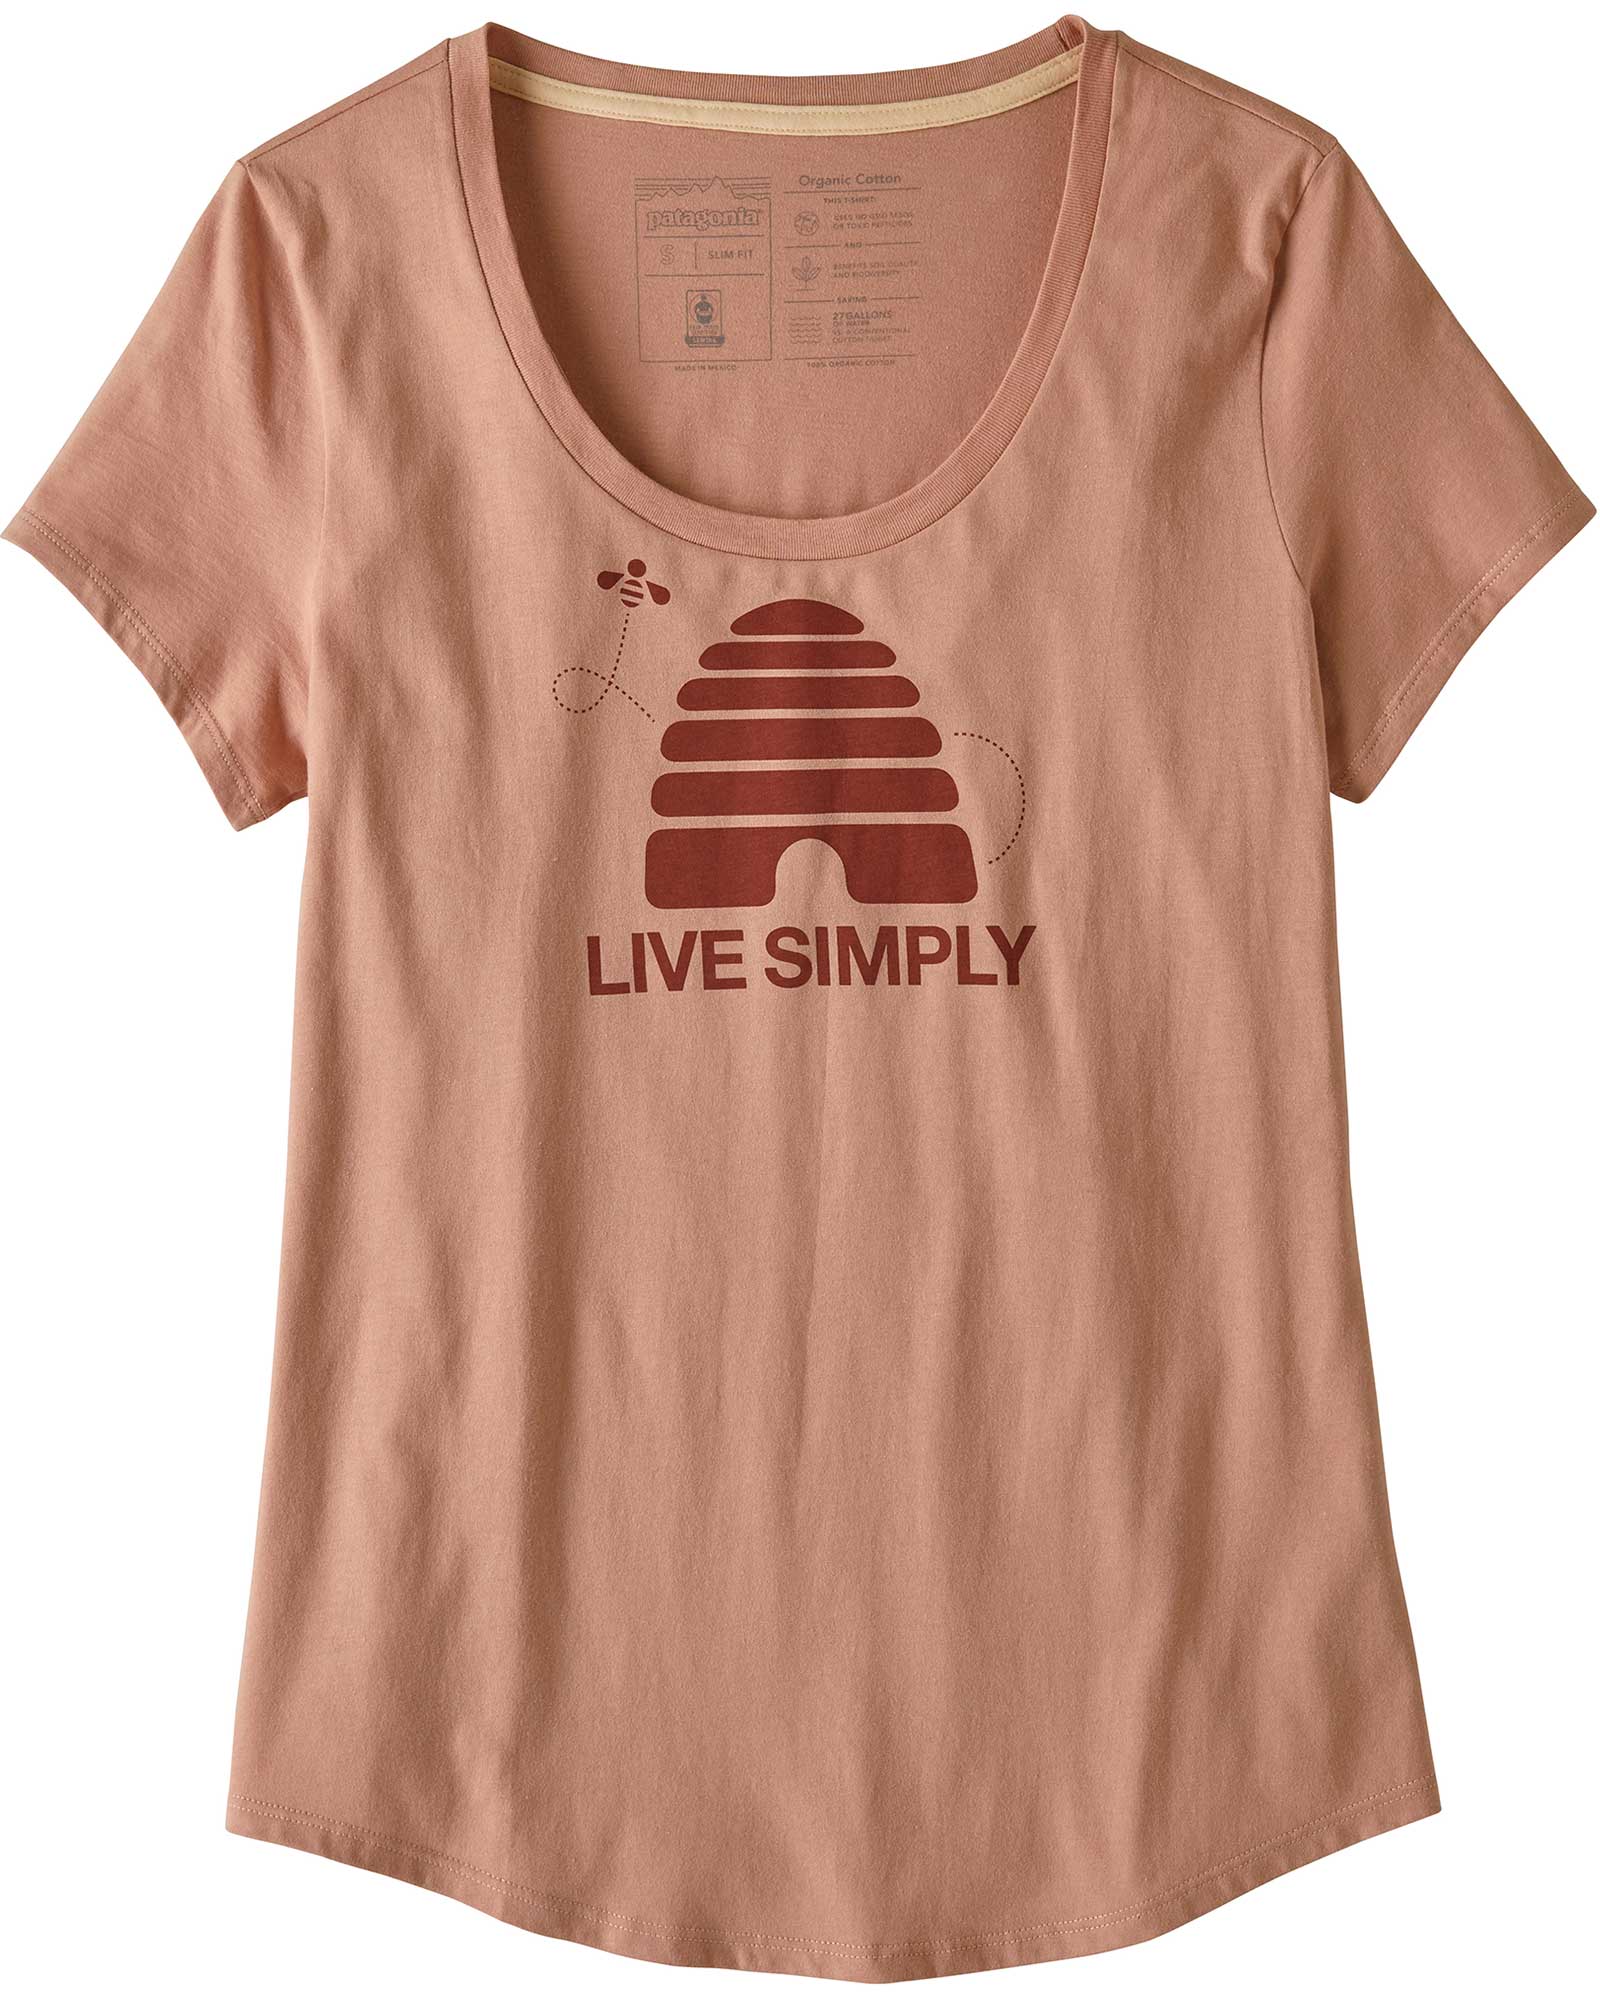 Patagonia Live Simply Hive Organic Women’s Scoop T Shirt - Scotch Pink S